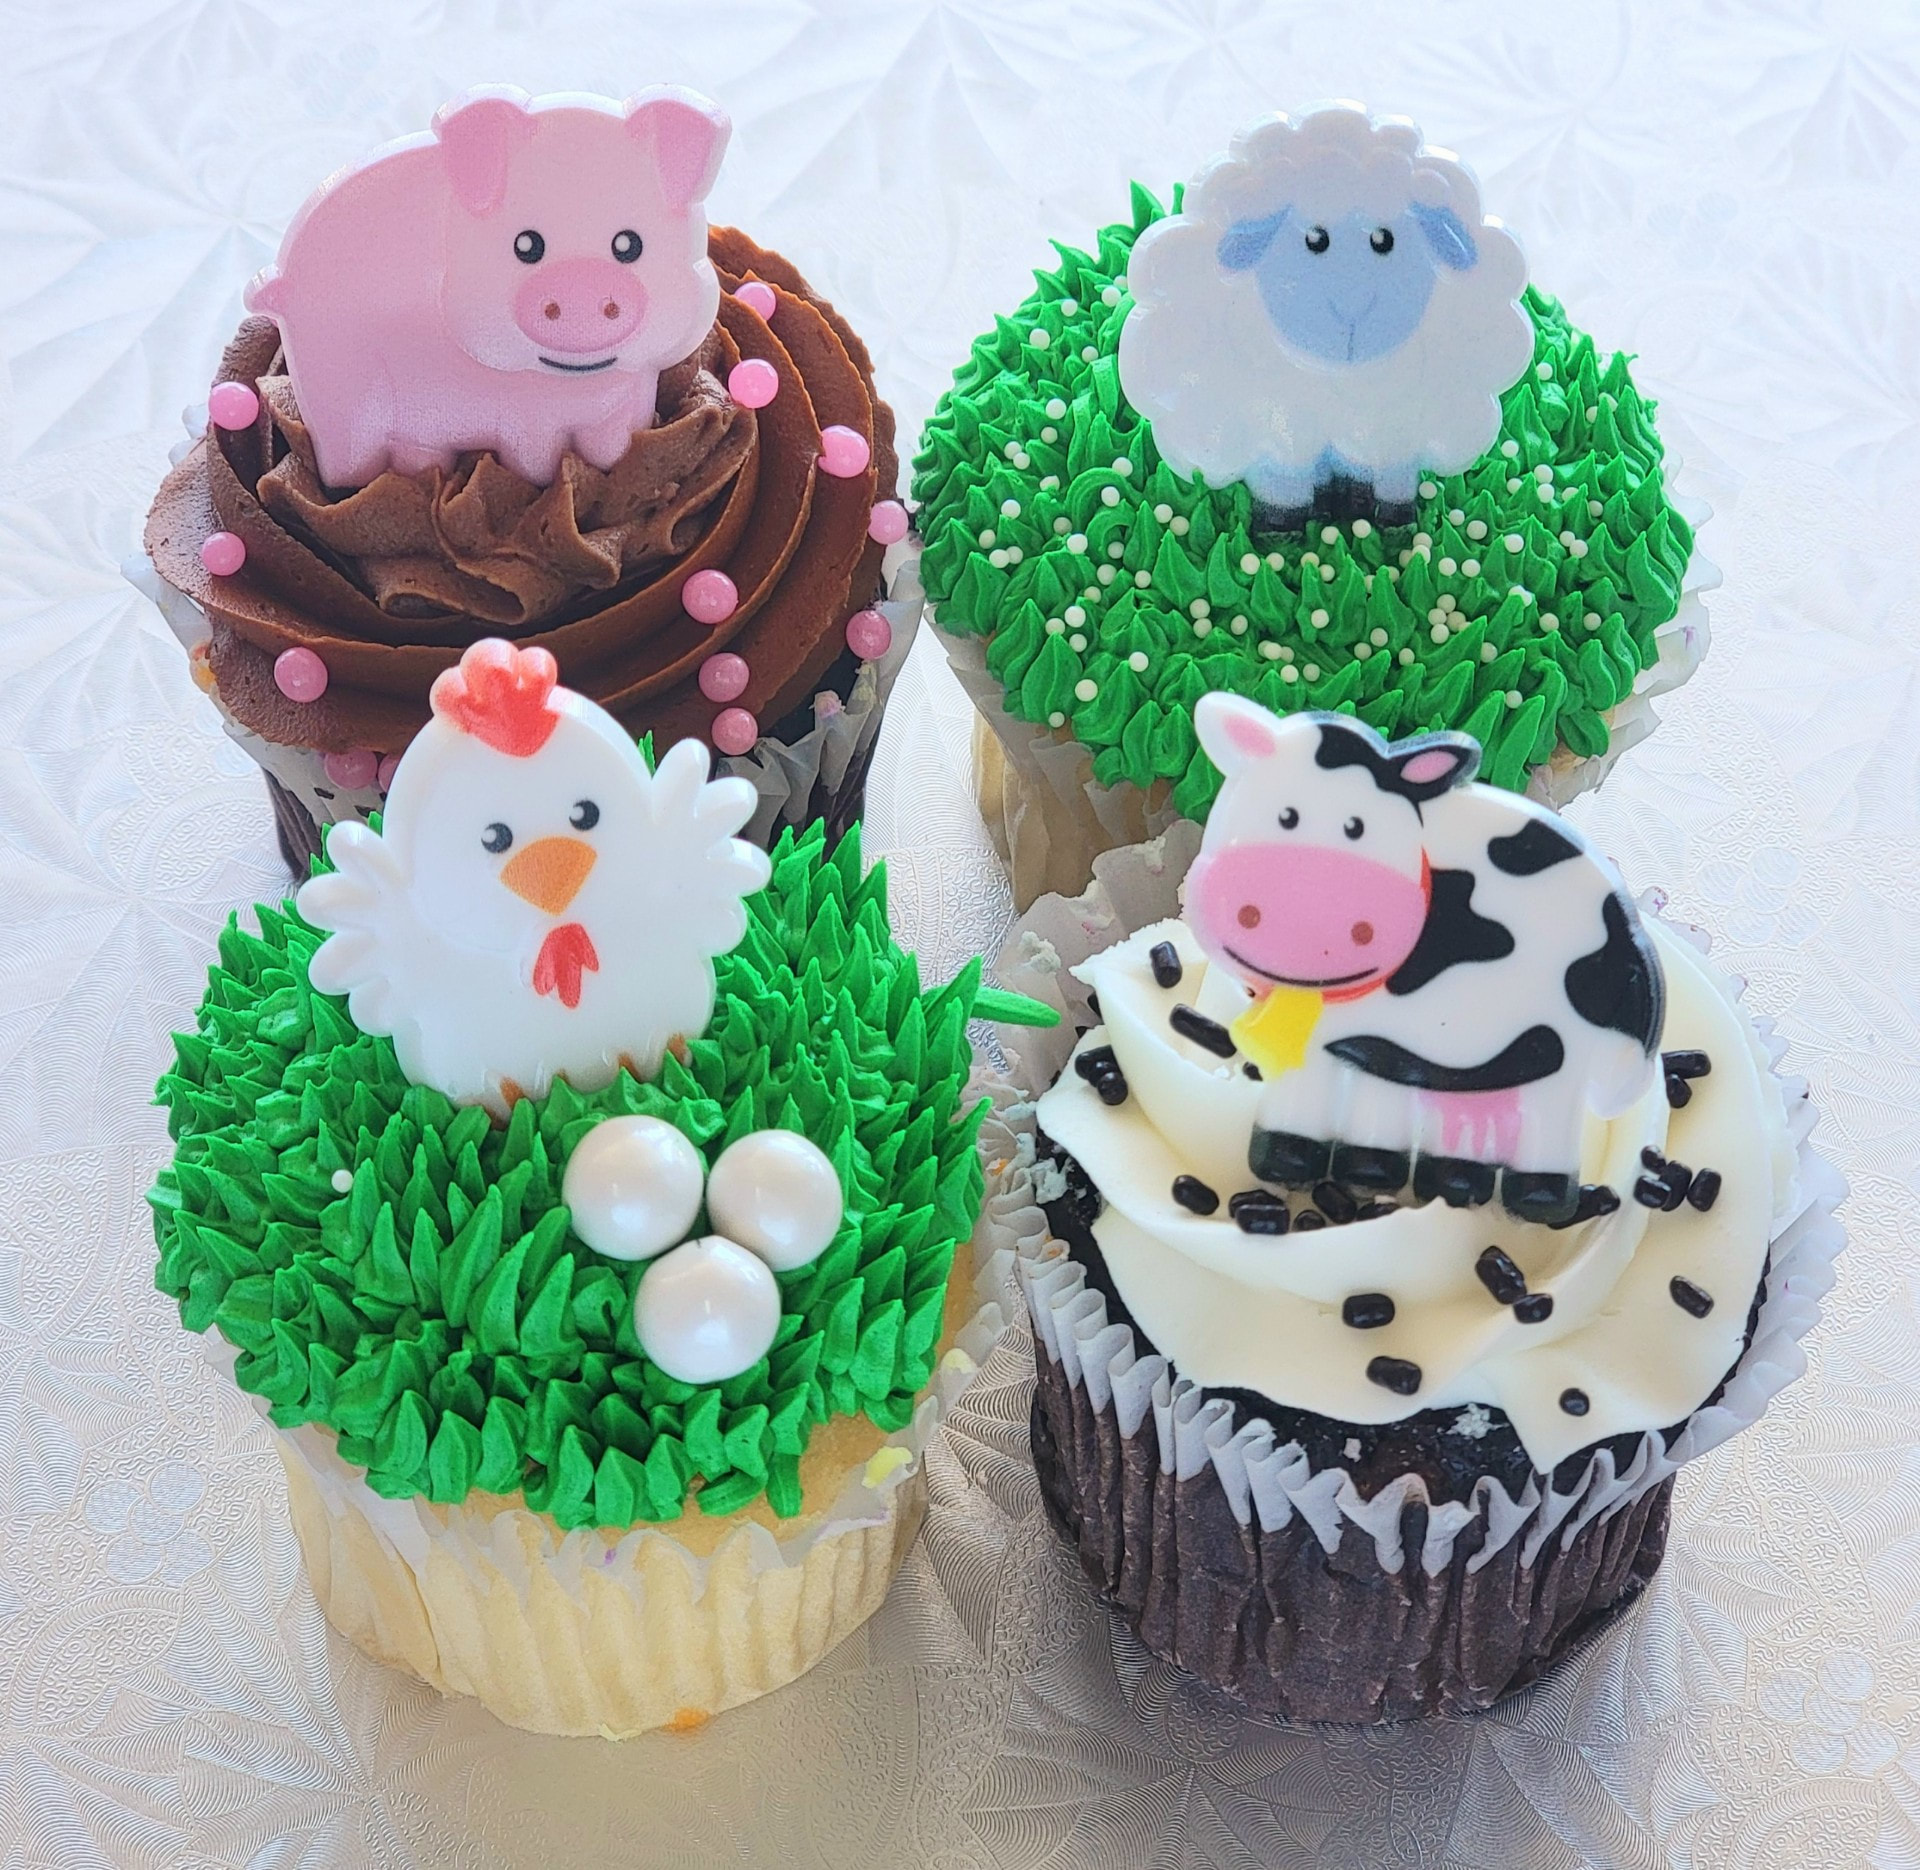 Down on the Farm Cupcakes | Local Pickup at Dewey's Bakery